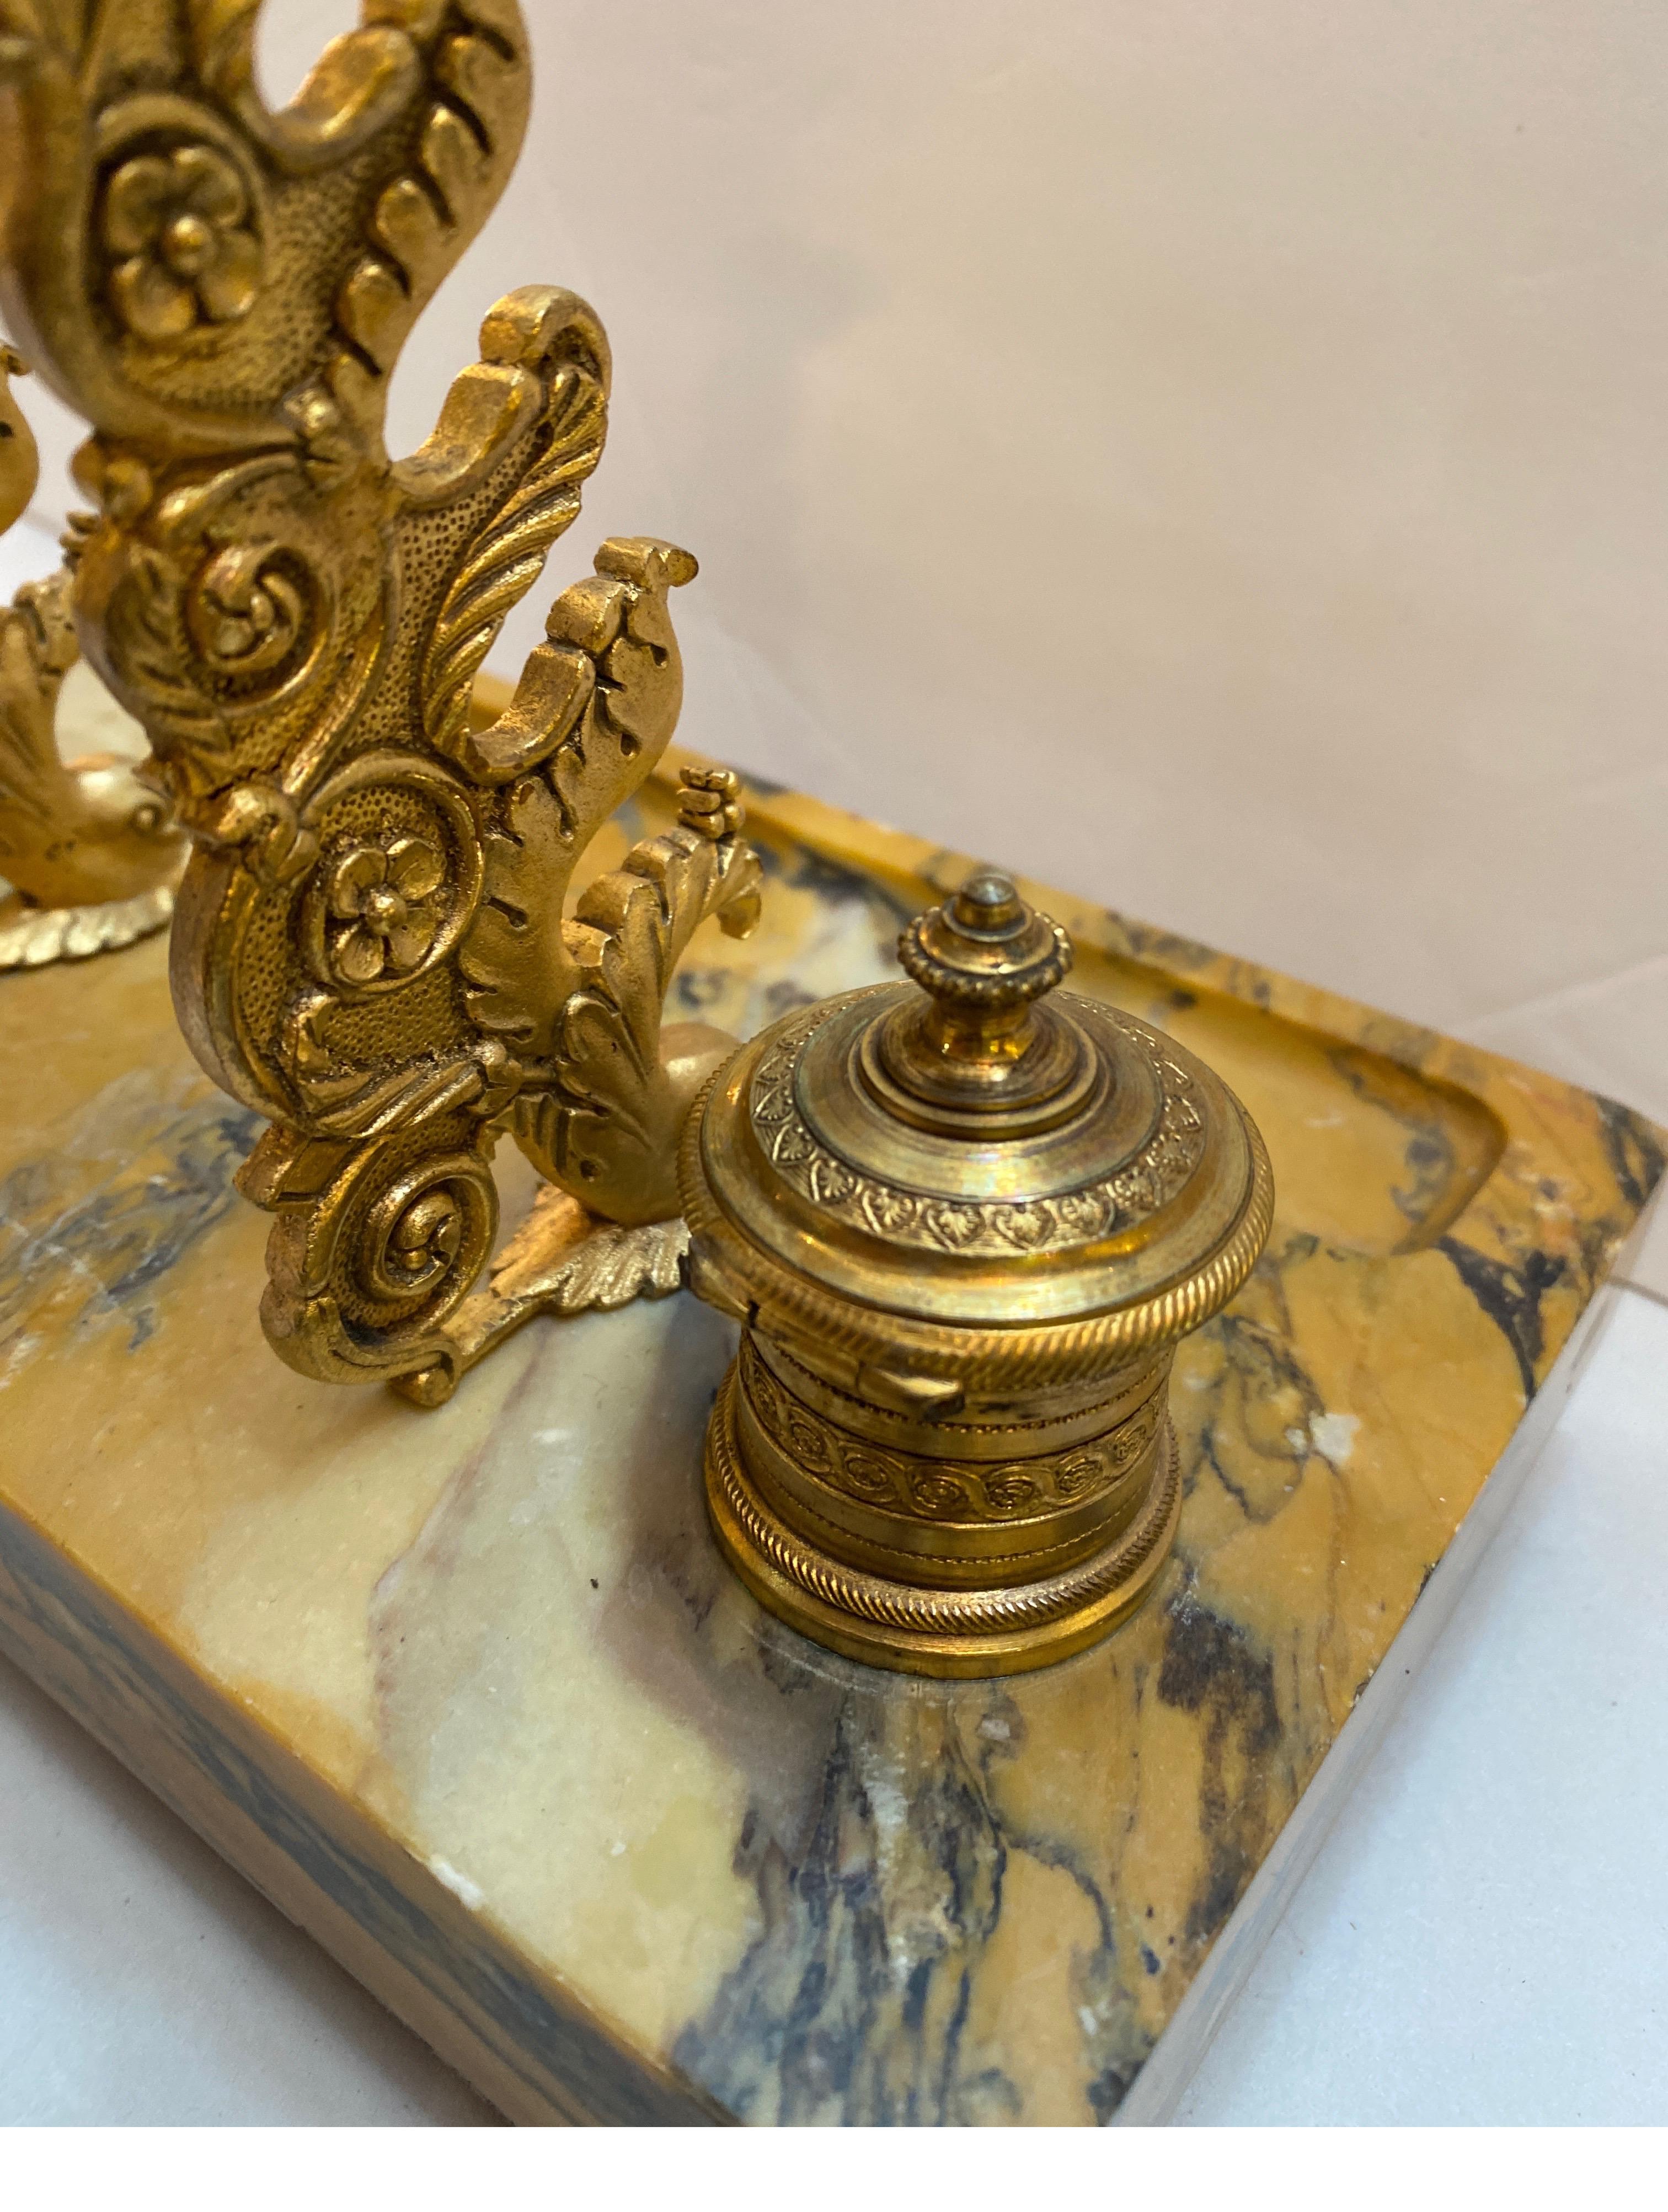 Siena Marble and Ormolu Double Inkstand Late 19th Century For Sale 4